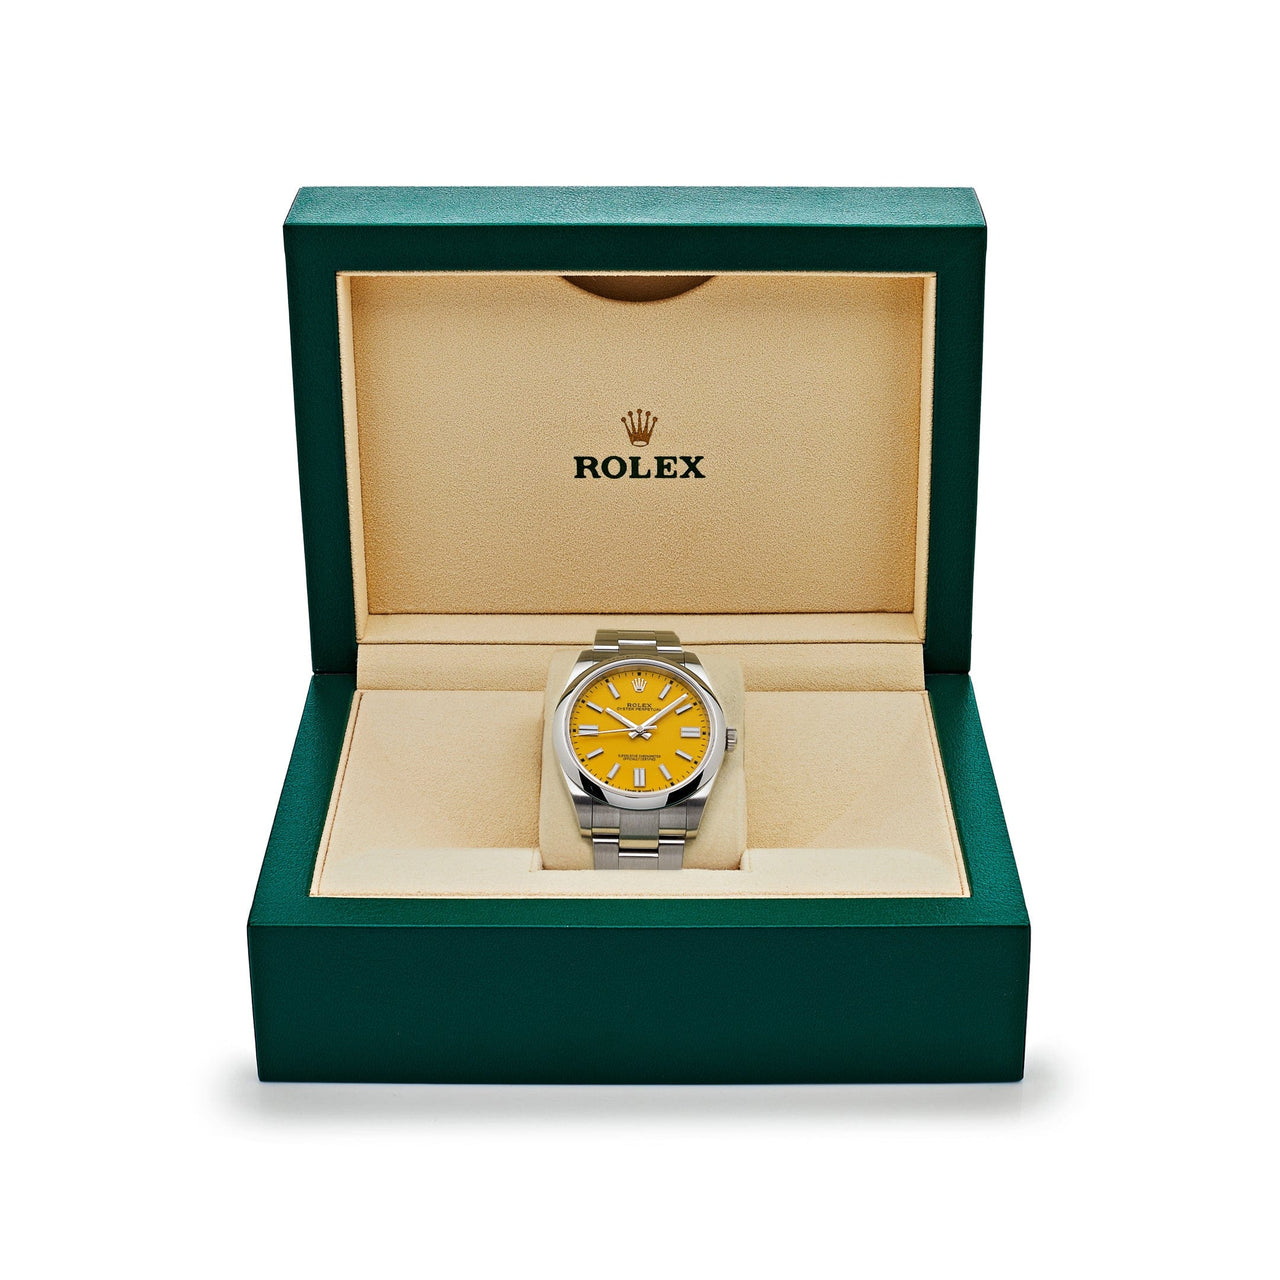 Rolex Oyster Perpetual 124300 Stainless Steel Yellow Dial